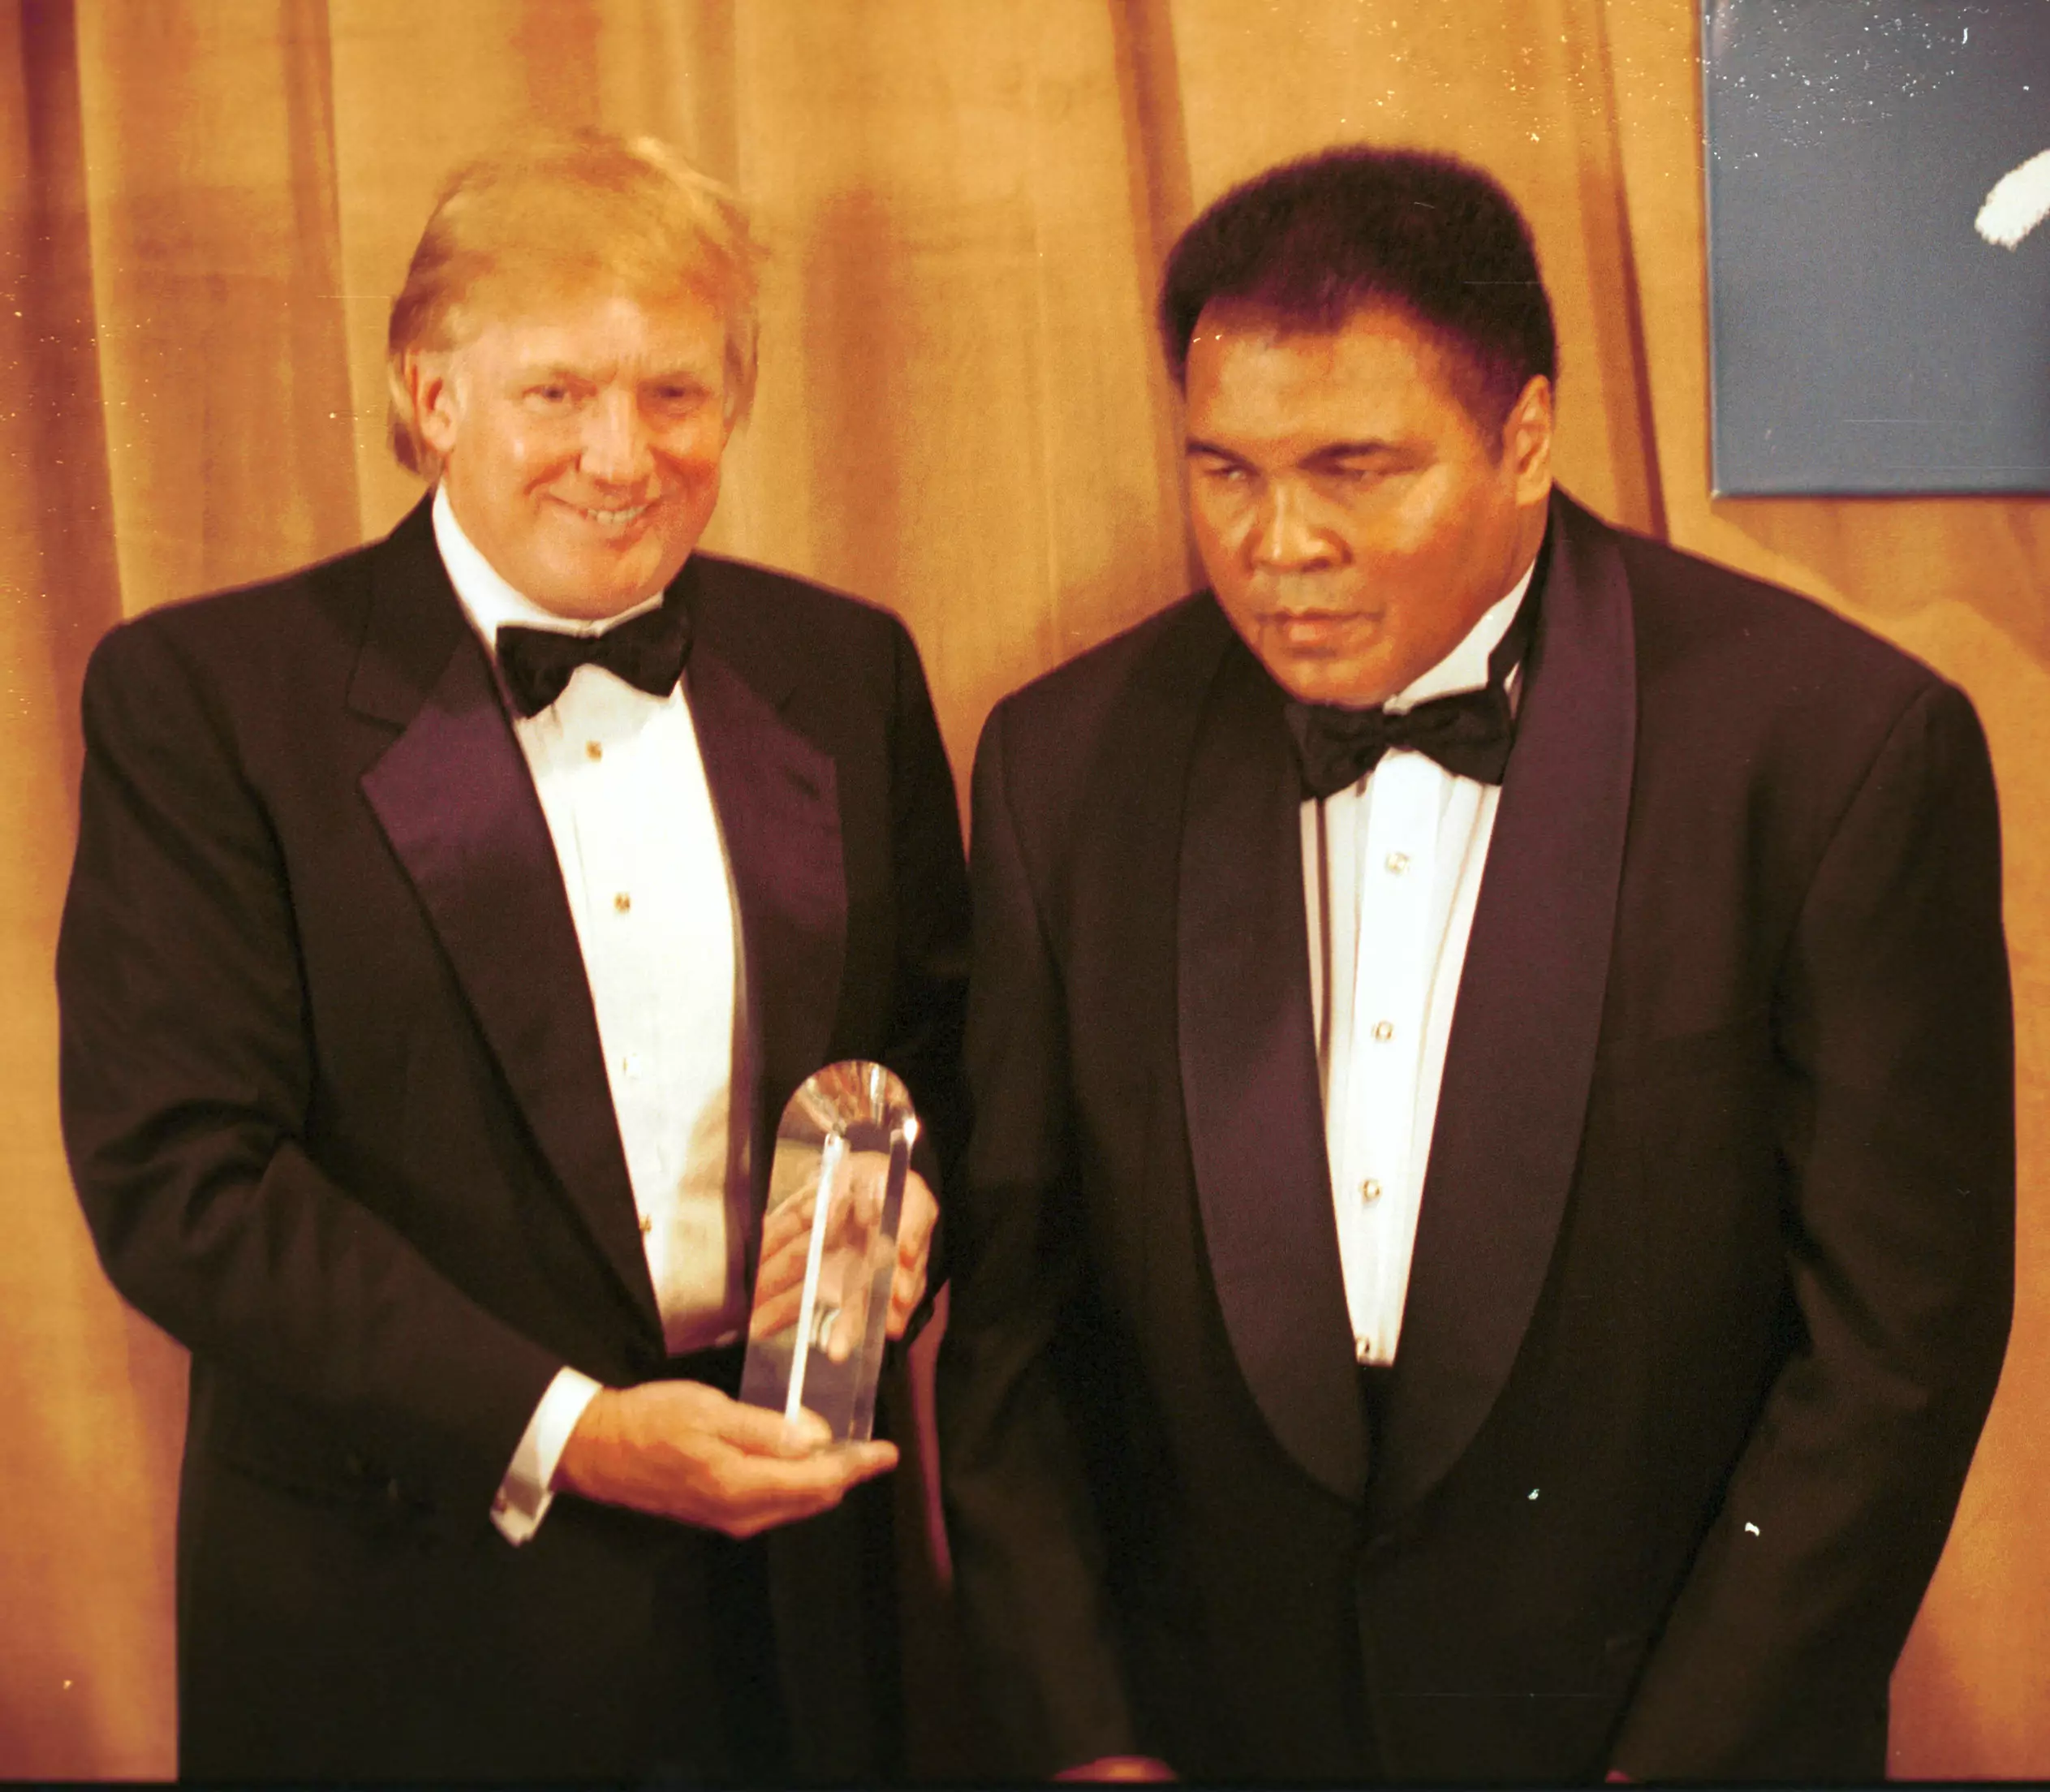 Never Forget That It Only Took Muhammad Ali 132 Words To Destroy Donald Trump